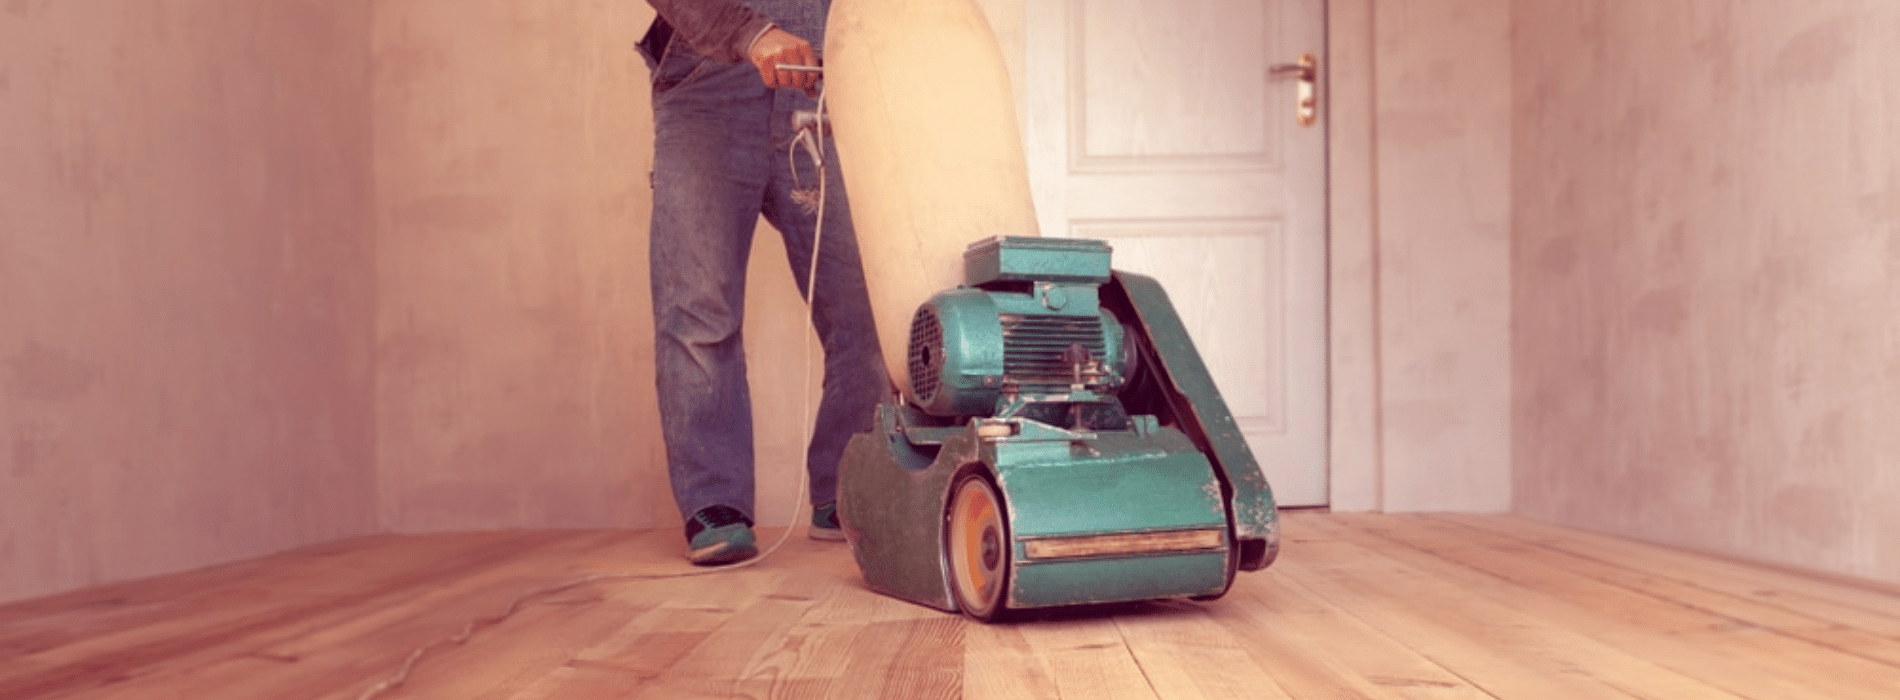 Mr Sander® in Hanwell, W7 offer meticulous herringbone floor restoration using a 2200 effect, 230V, 50Hz Bona belt sander (200x750 mm). Our services include a clean, dust-free experience with a HEPA filter dust extraction system.